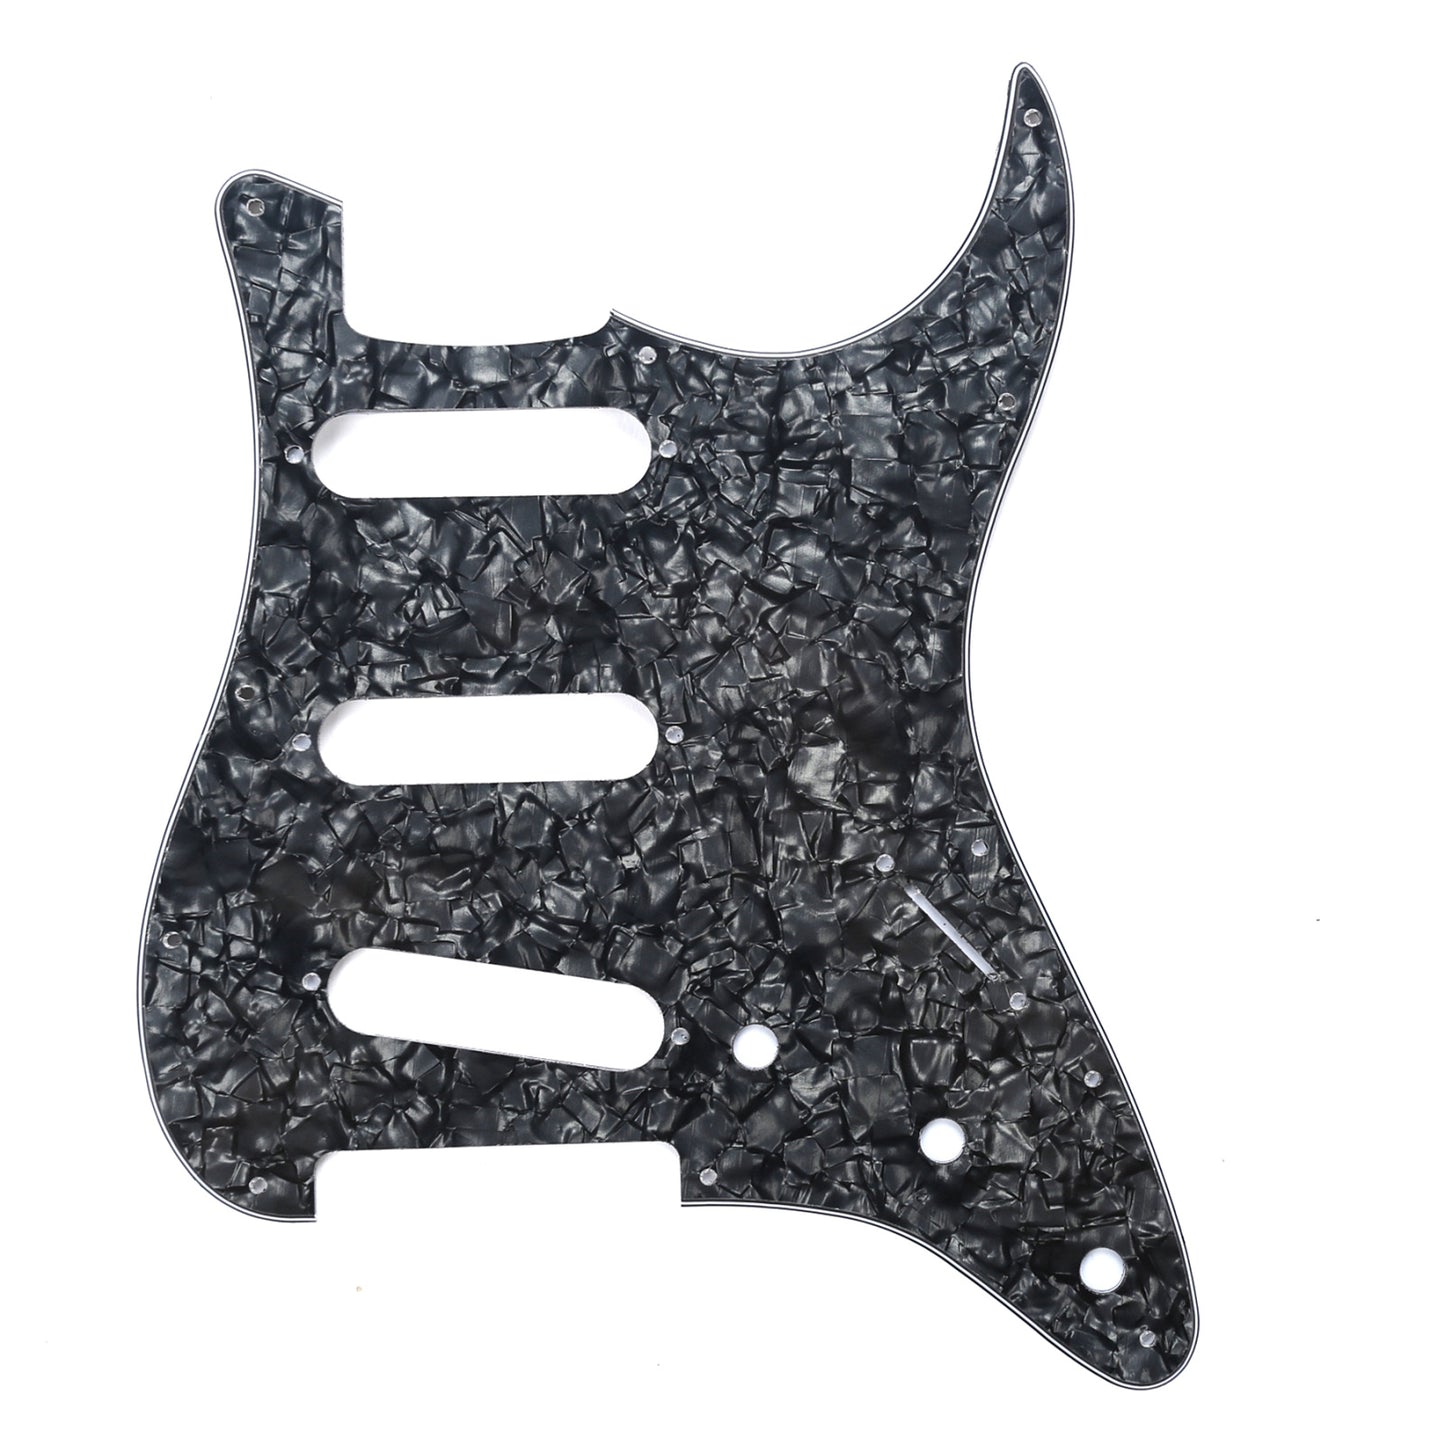 Musiclily SSS 11 Hole Strat Guitar Pickguard for Fender USA/Mexican Made Standard Stratocaster Modern Style, 4Ply Black Pearl